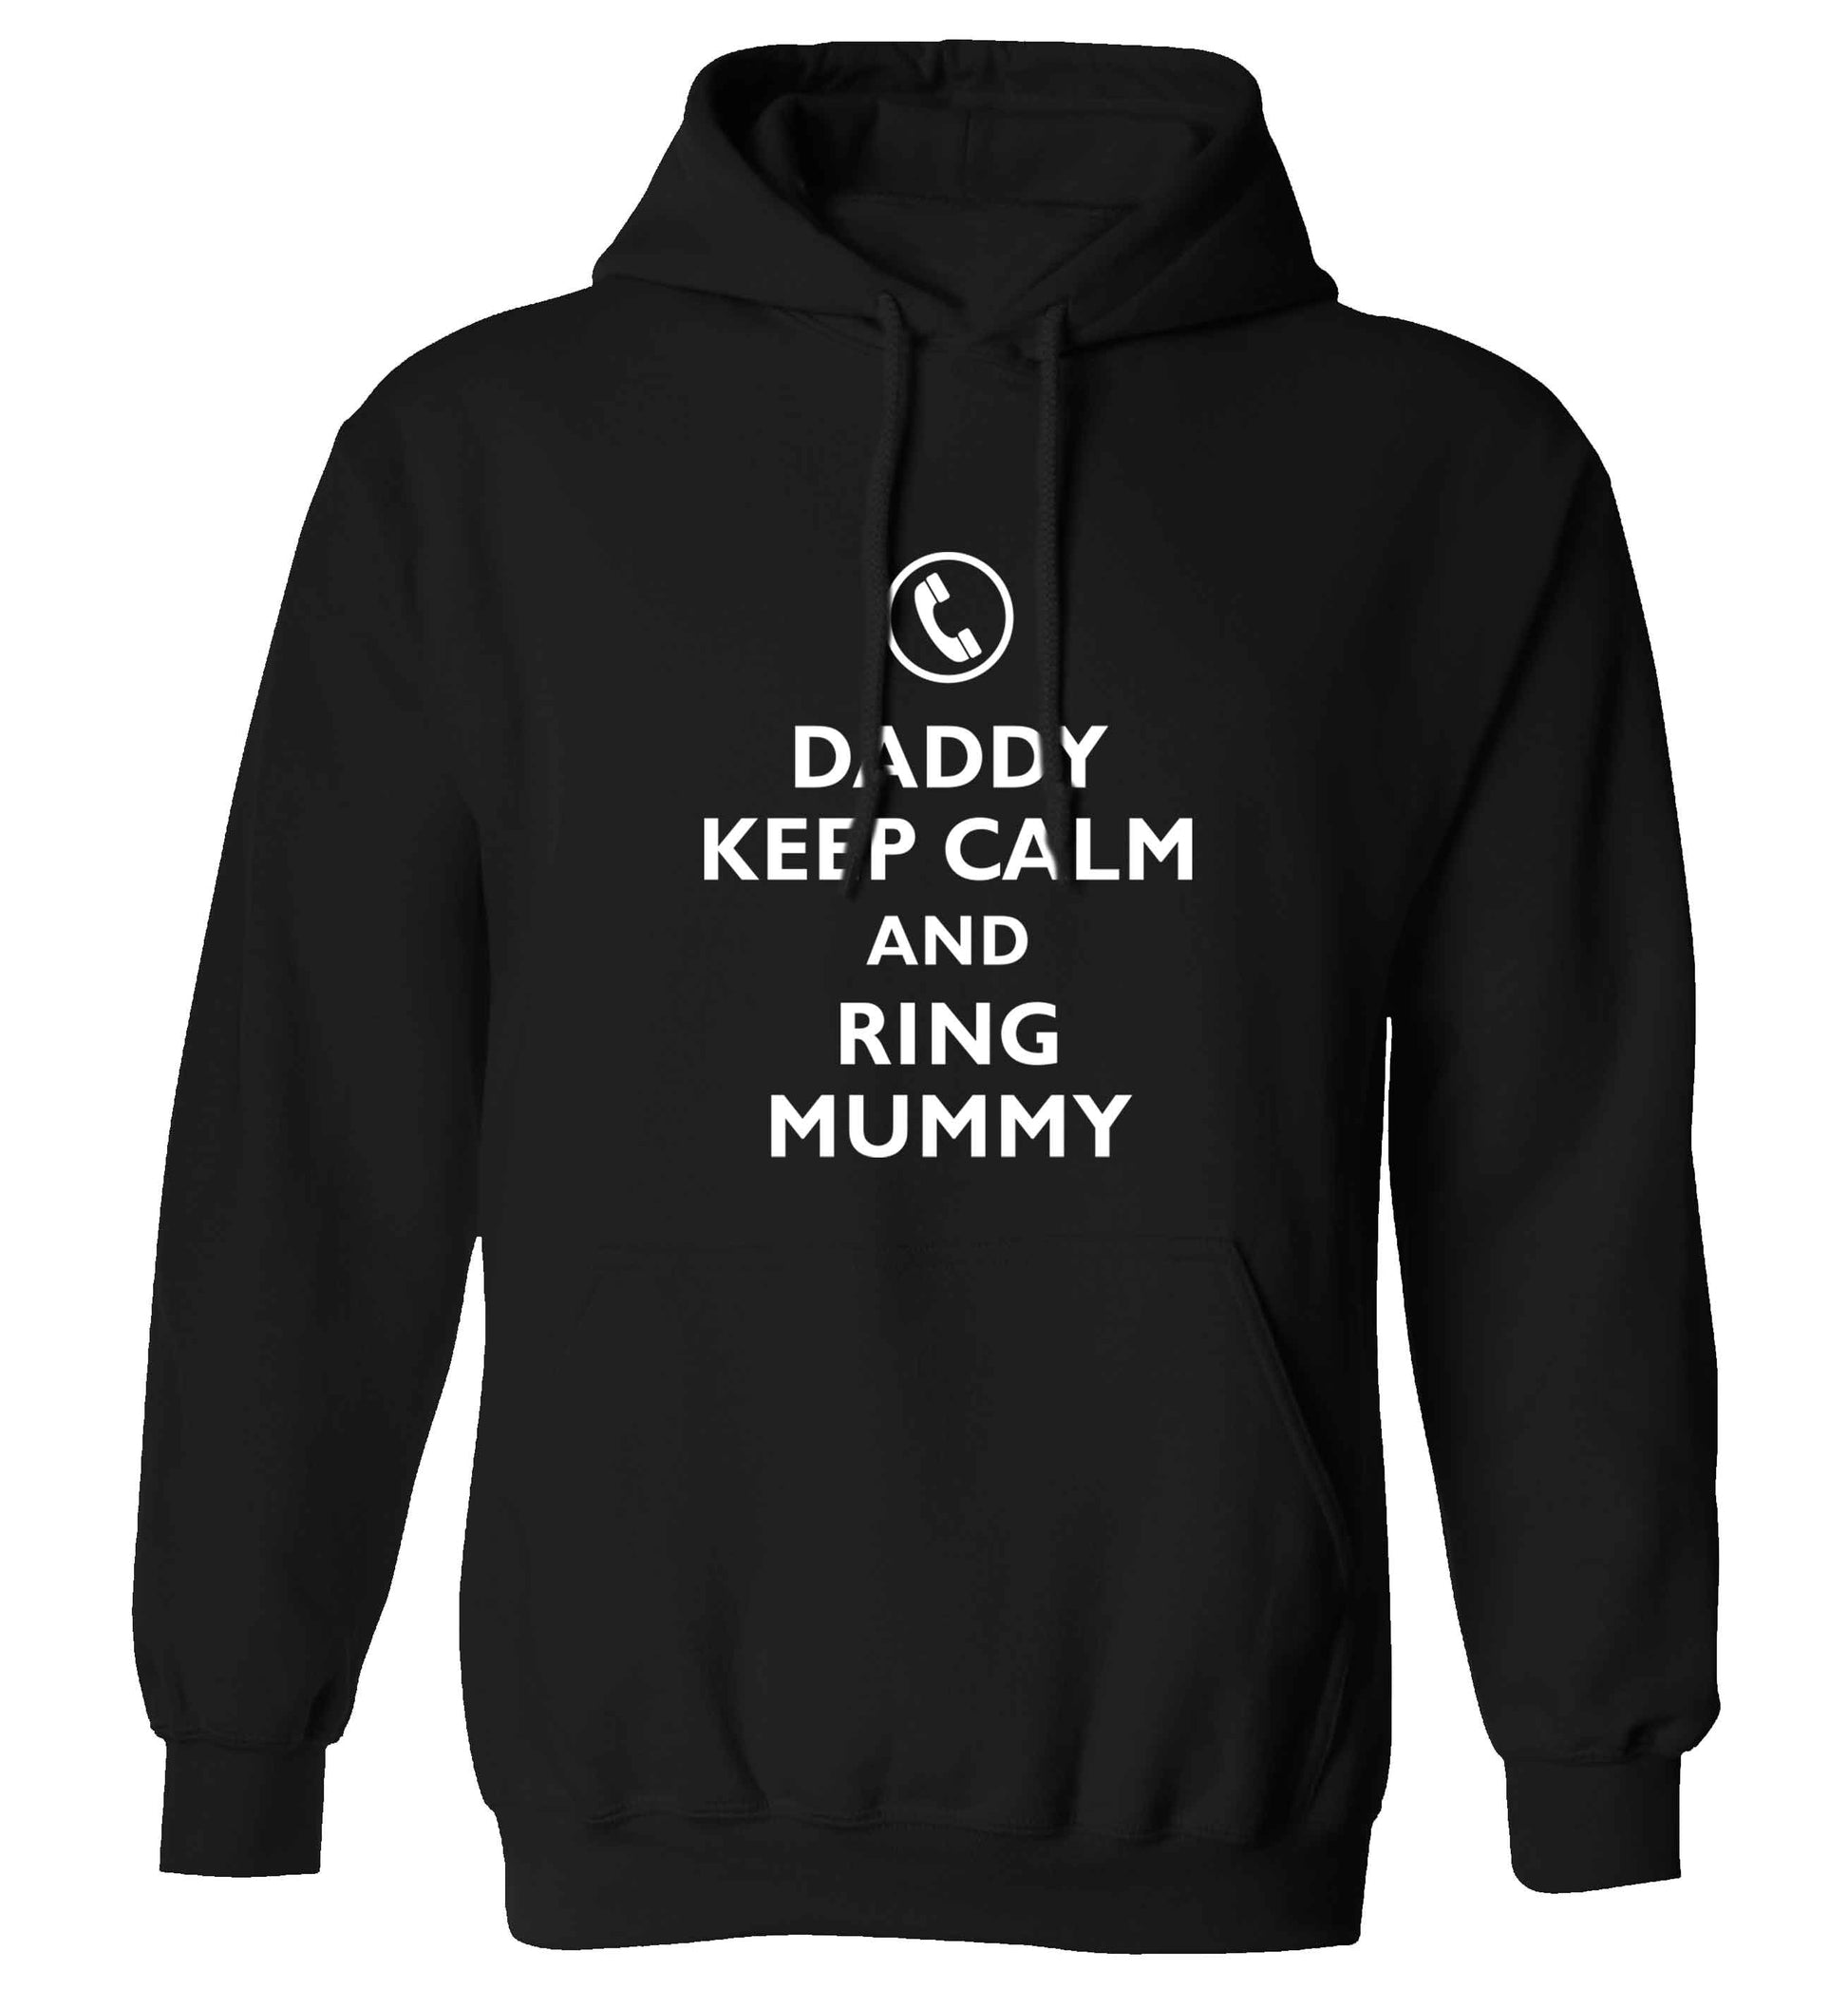 Daddy keep calm and ring mummy adults unisex black hoodie 2XL